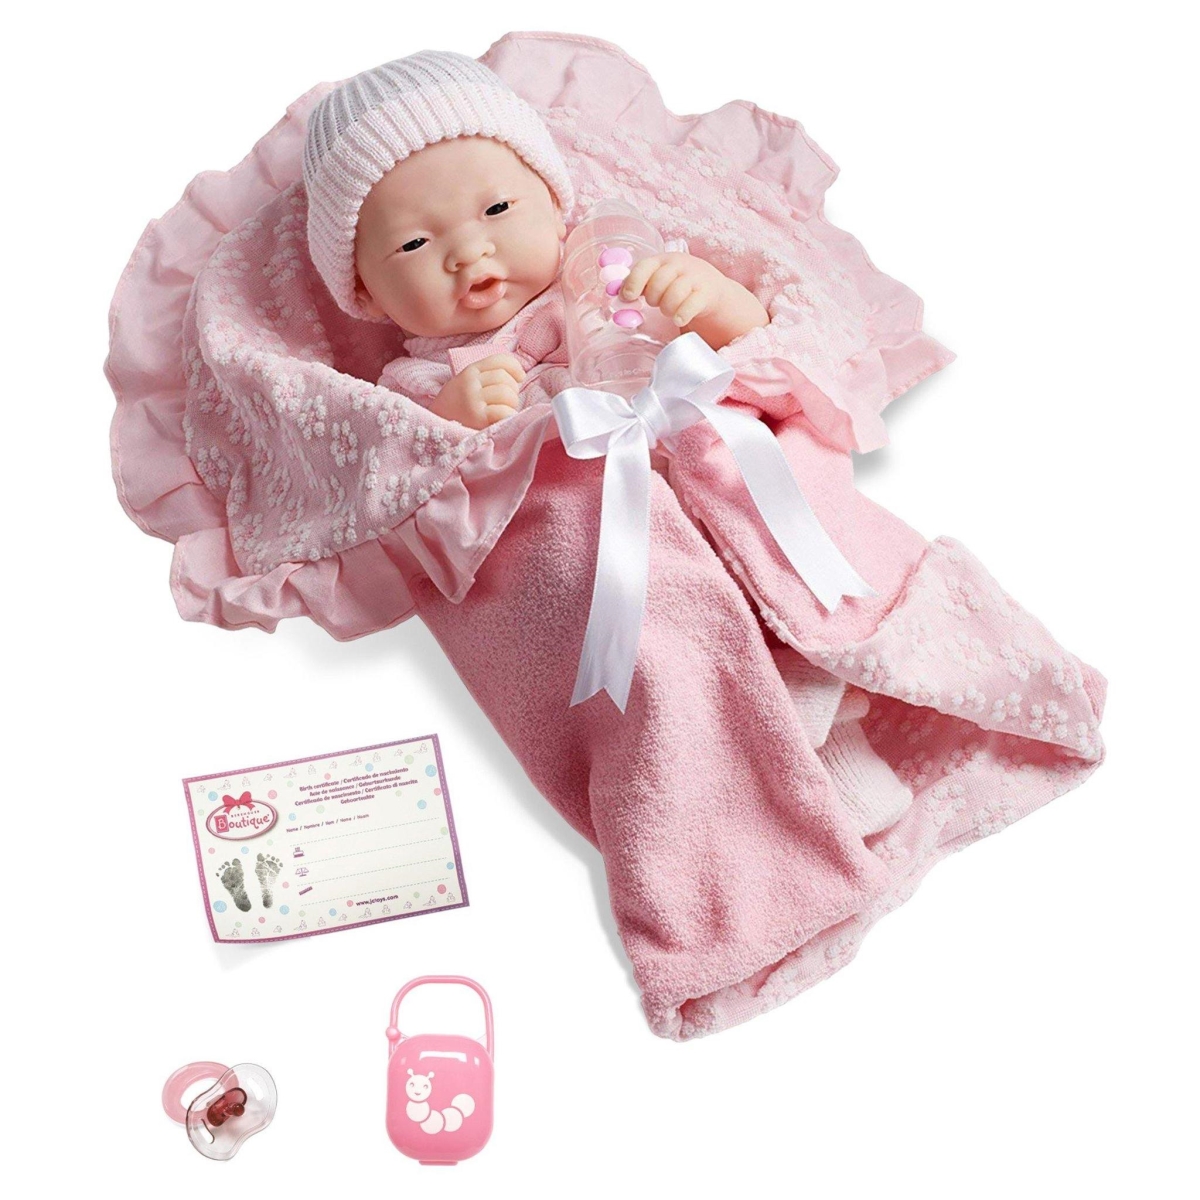 Picture of Soft Body La Newborn Asian Baby Doll 15.5 in. Deluxe Pink Layette Set